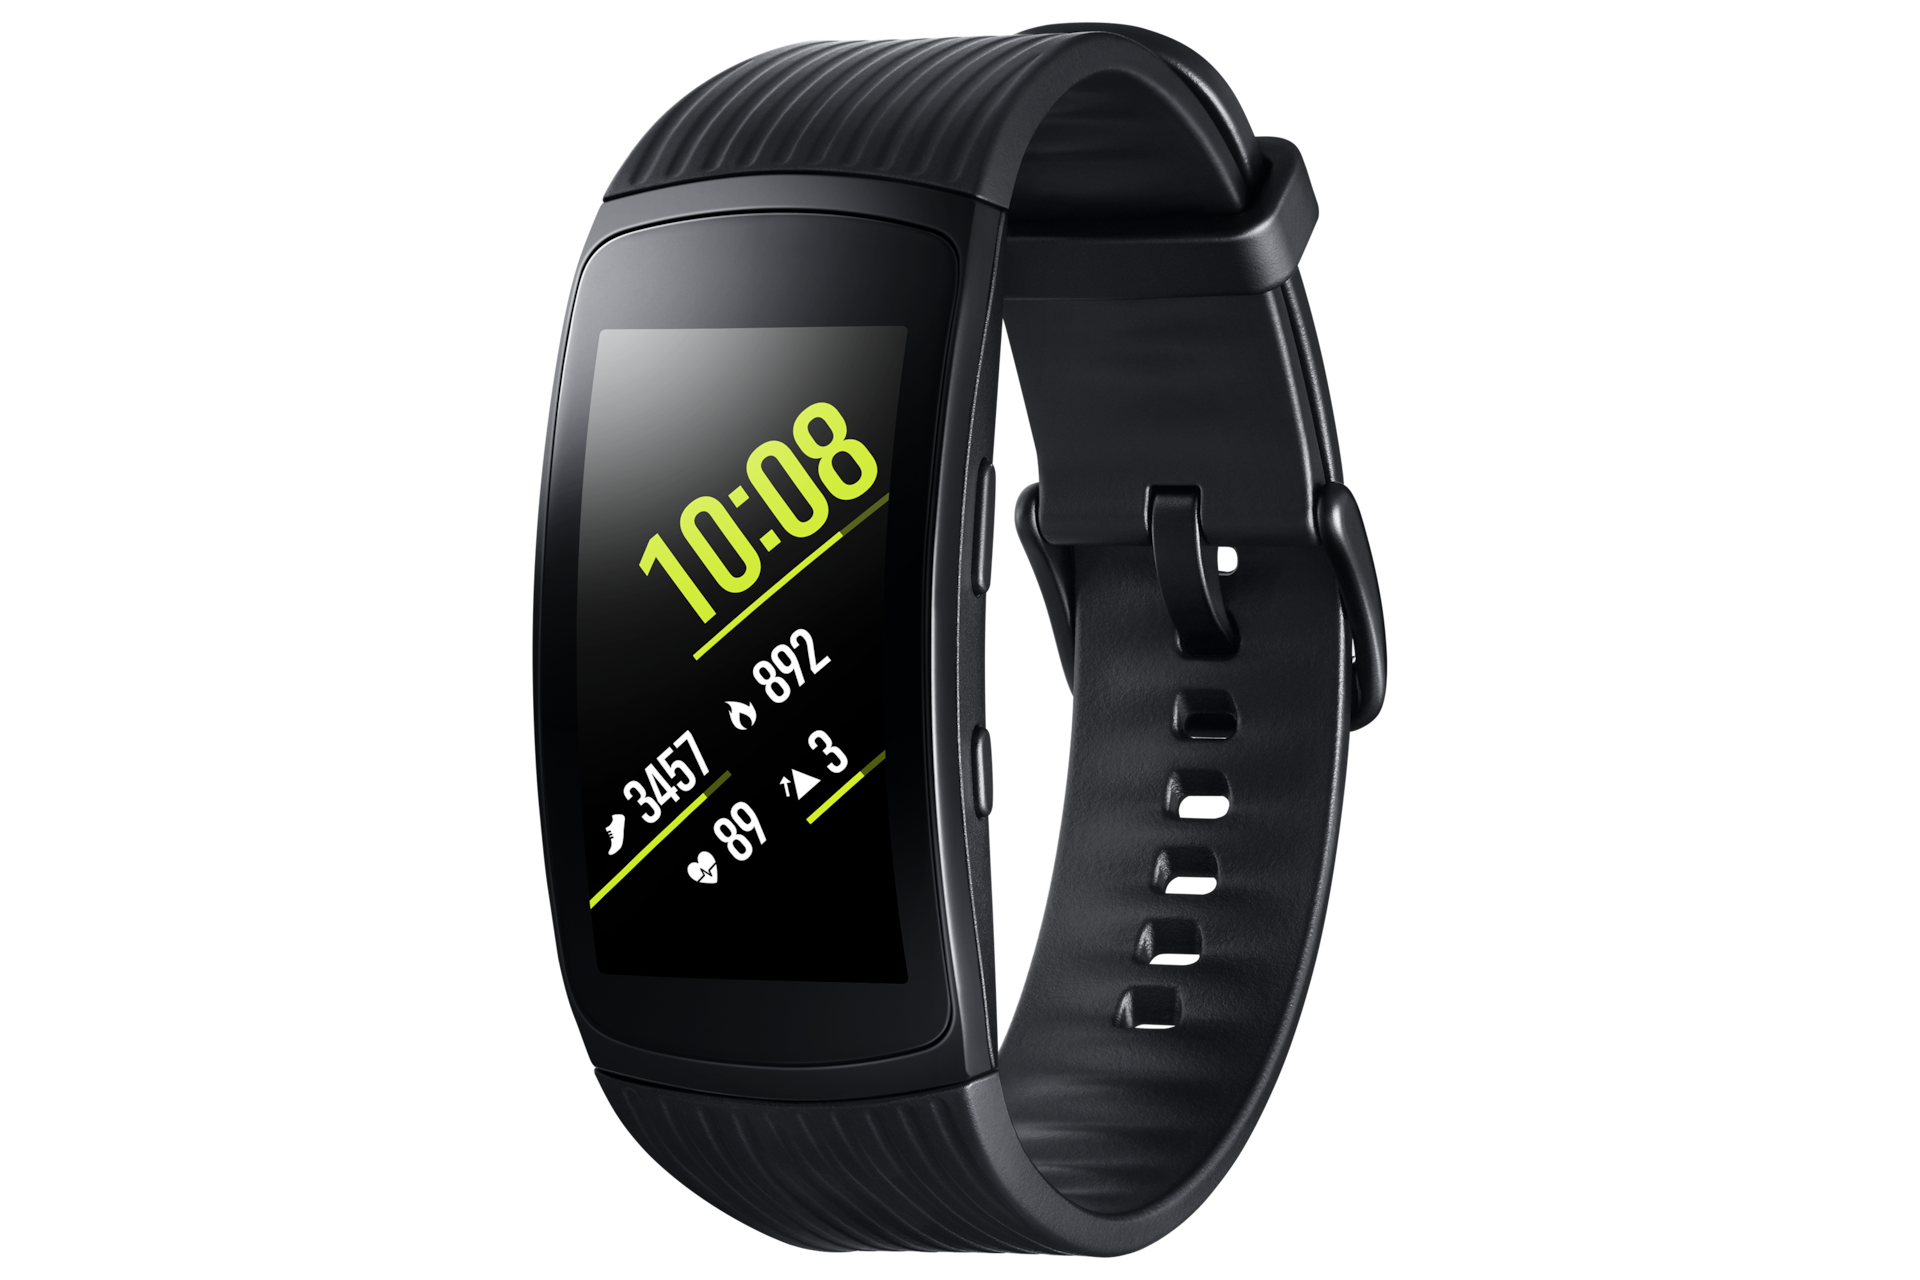 difference between samsung gear fit 2 and gear fit 2 pro